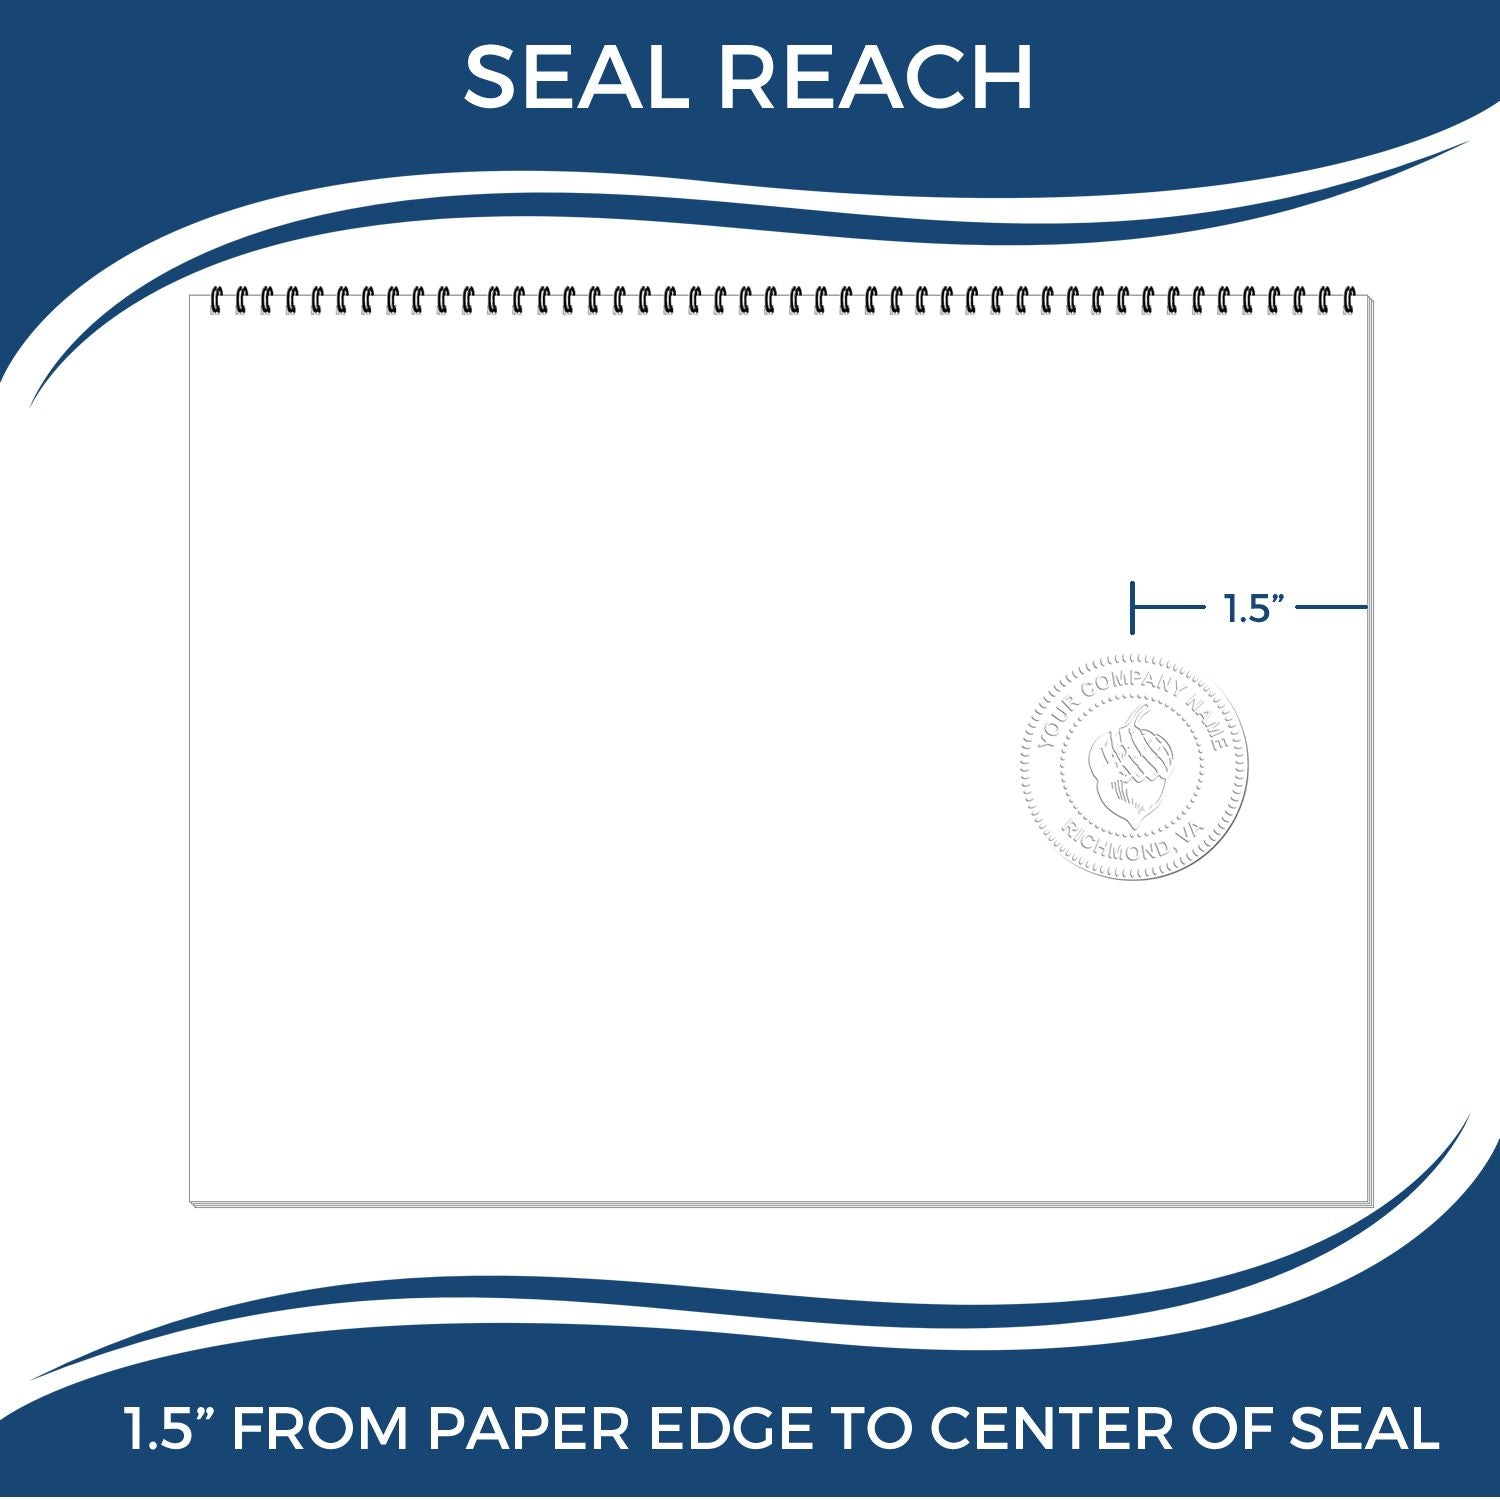 An infographic showing the seal reach which is represented by a ruler and a miniature seal image of the New Mexico Desk Surveyor Seal Embosser